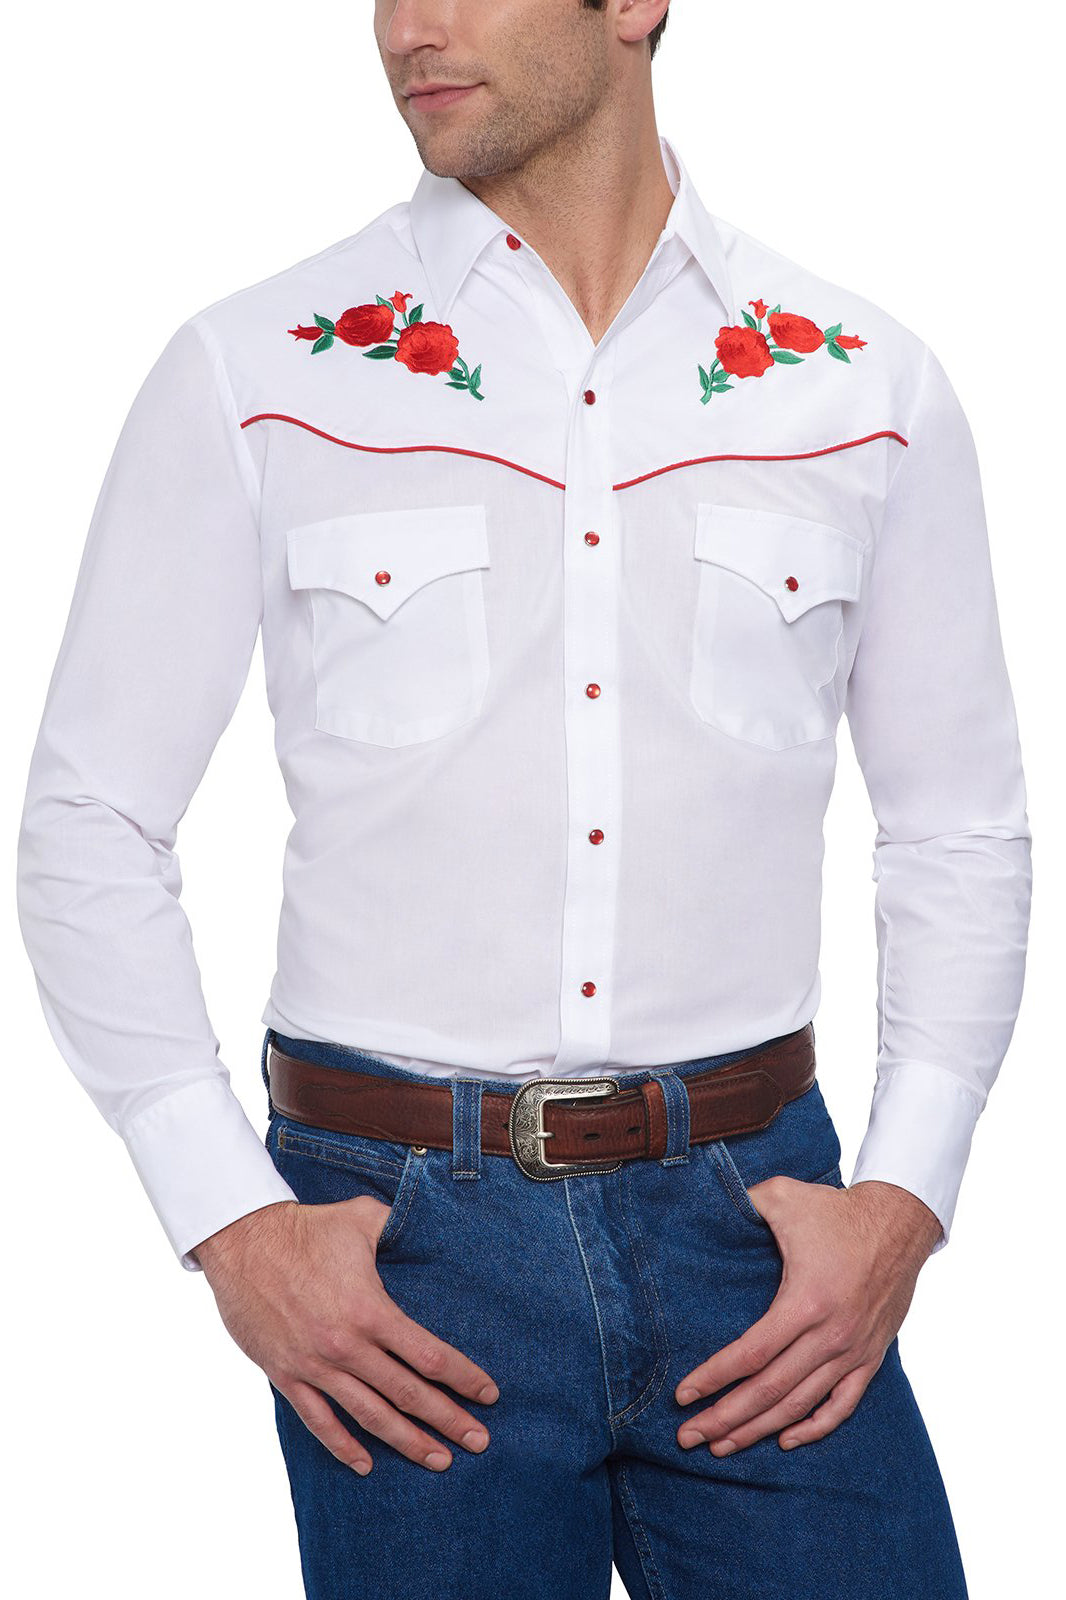 white button up shirt mens long sleeve